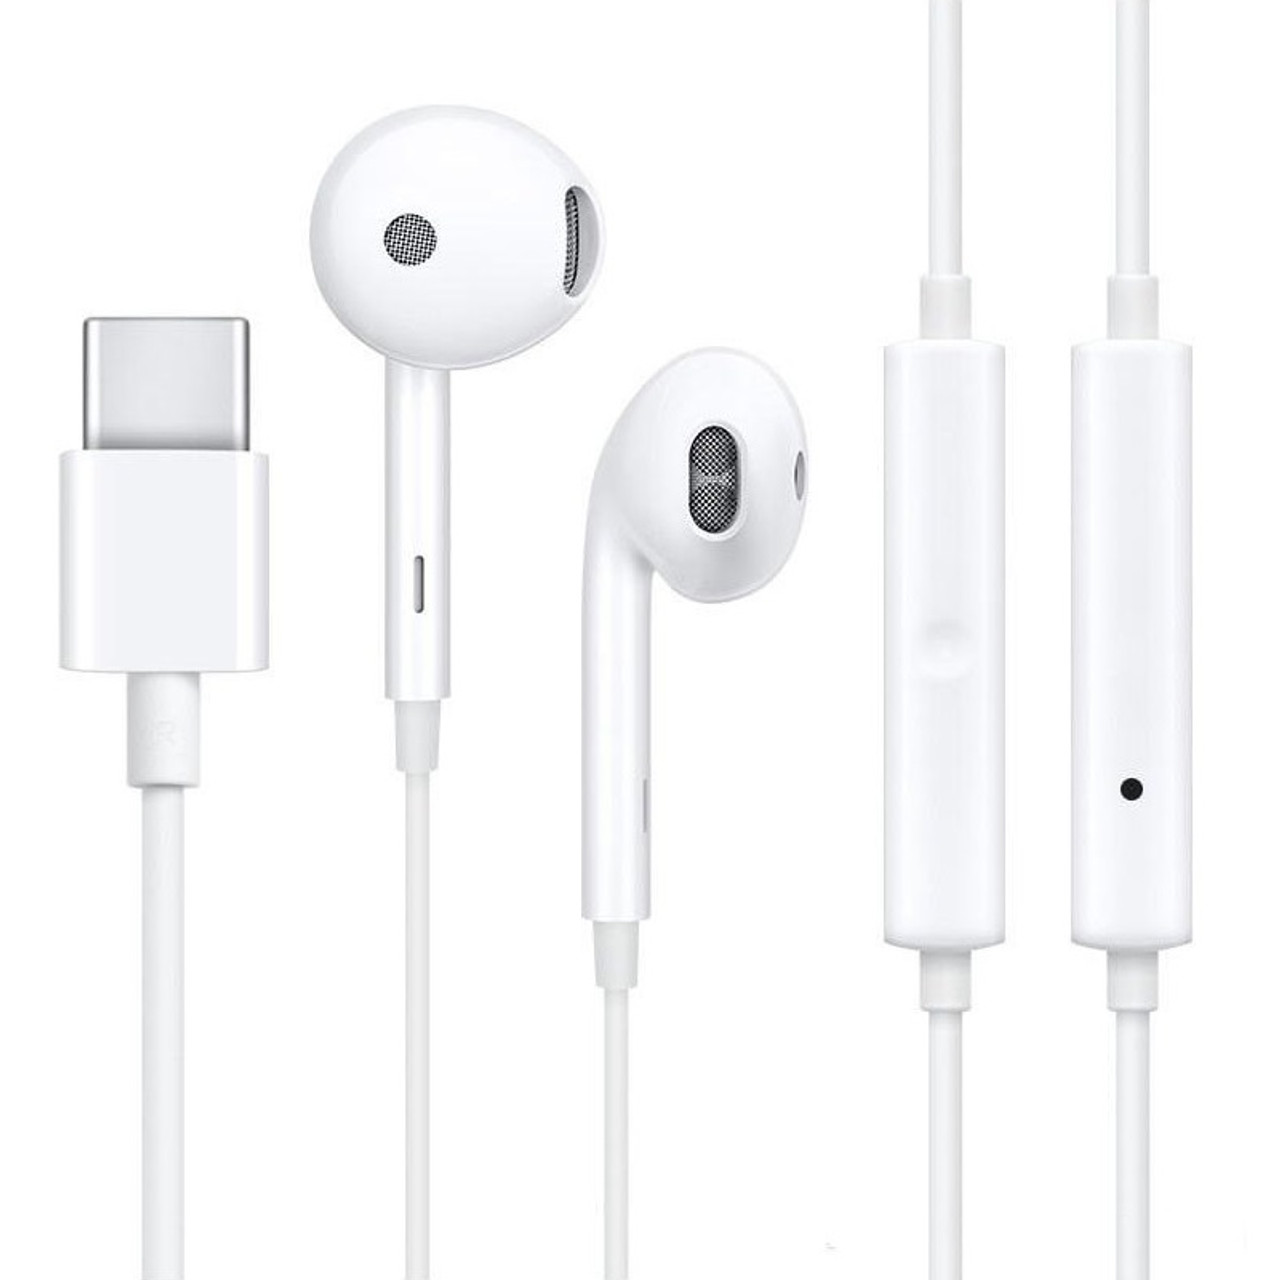 USB Type-C Earphone MH135 USB-C Headset With Mic Control Button For Oppo FindX R17 Pro R17 Find X Find X3 Find X5 Pro Oppo Reno9 Pro+ Mobile Phone